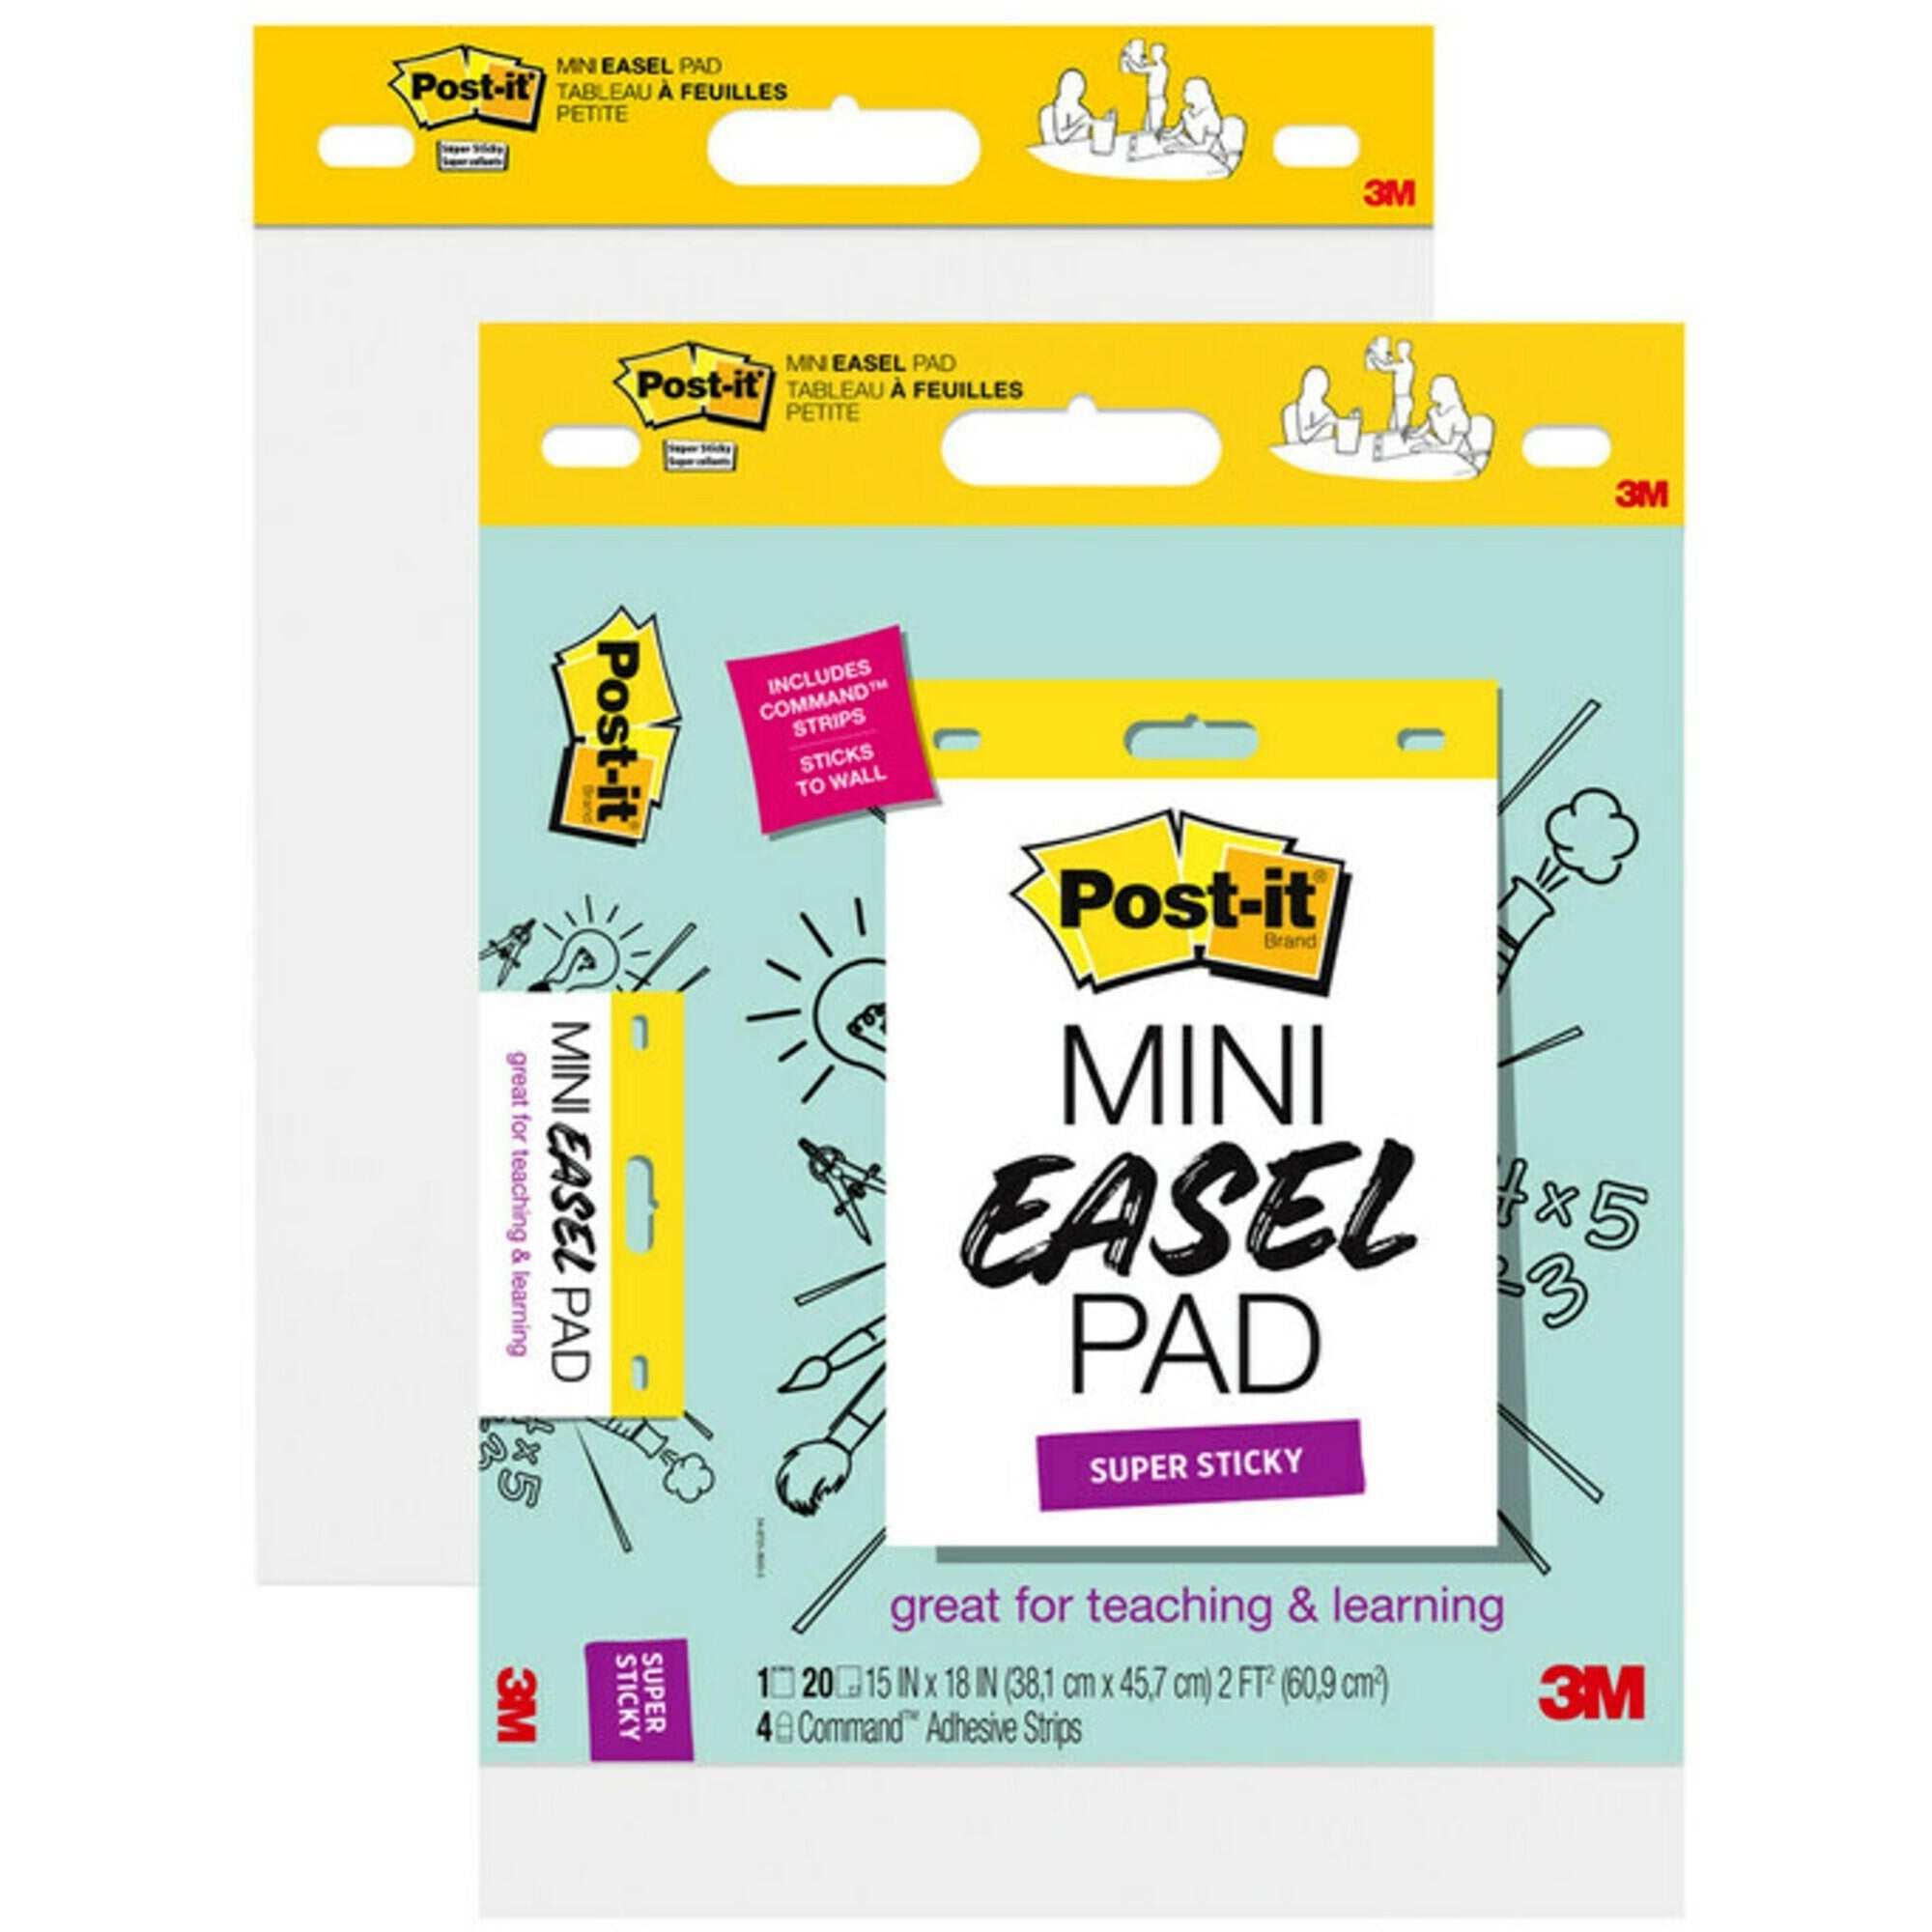 post-it-post-it-super-sticky-mini-easel-pad-1-subjects-20-sheets-stapled-portable-self-stick-bleed-resistant-sturdy-back-built-in-carry-handle-2-pack_mmm577ss2pk - 1